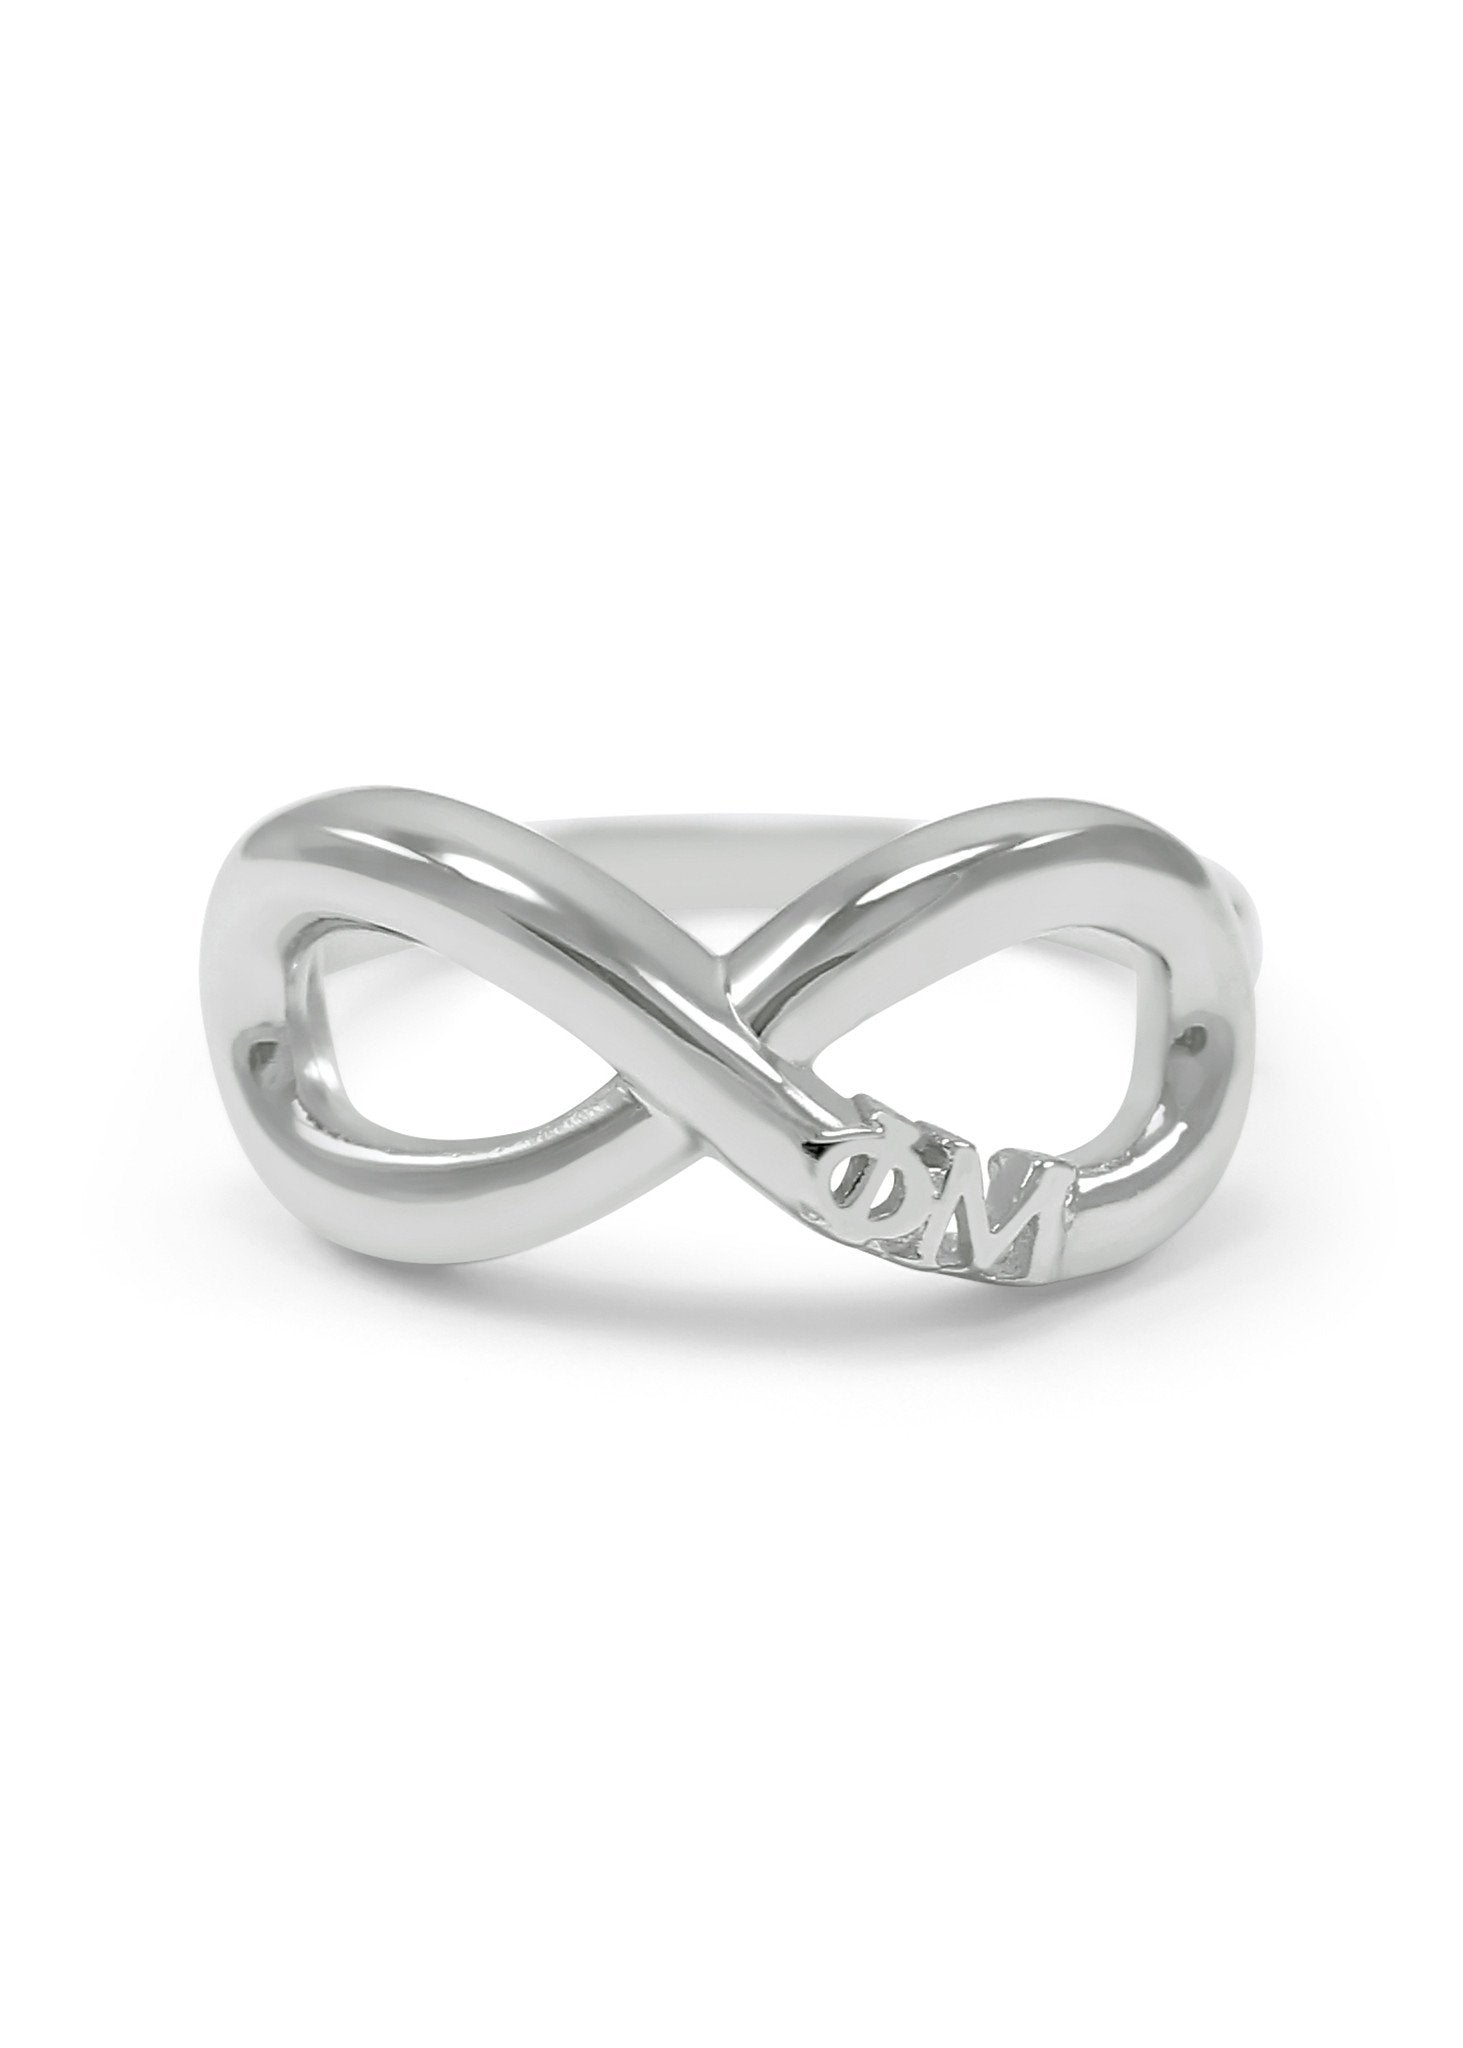 Infinity Engraved His And Her diamond Matching Bands In 14K White Gold |  Fascinating Diamonds